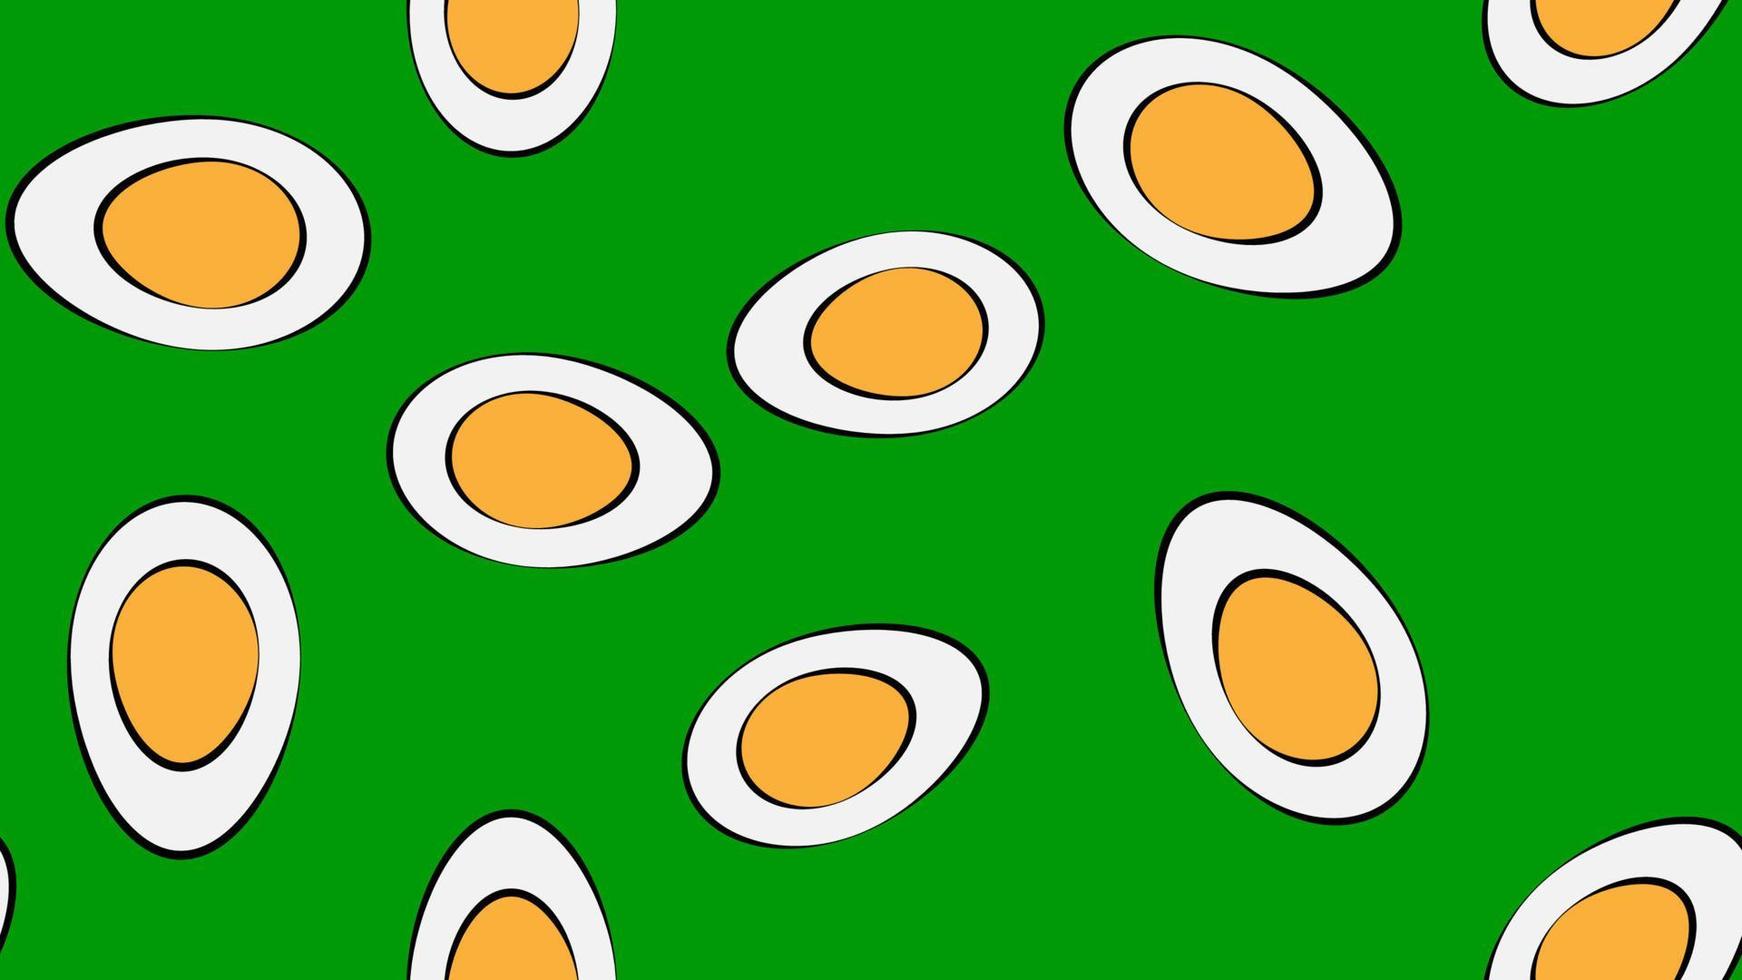 boiled egg on a green background, vector illustration, pattern. egg with yellow yolk. delicious breakfast. seamless illustration. stylish decor for cafes and restaurants